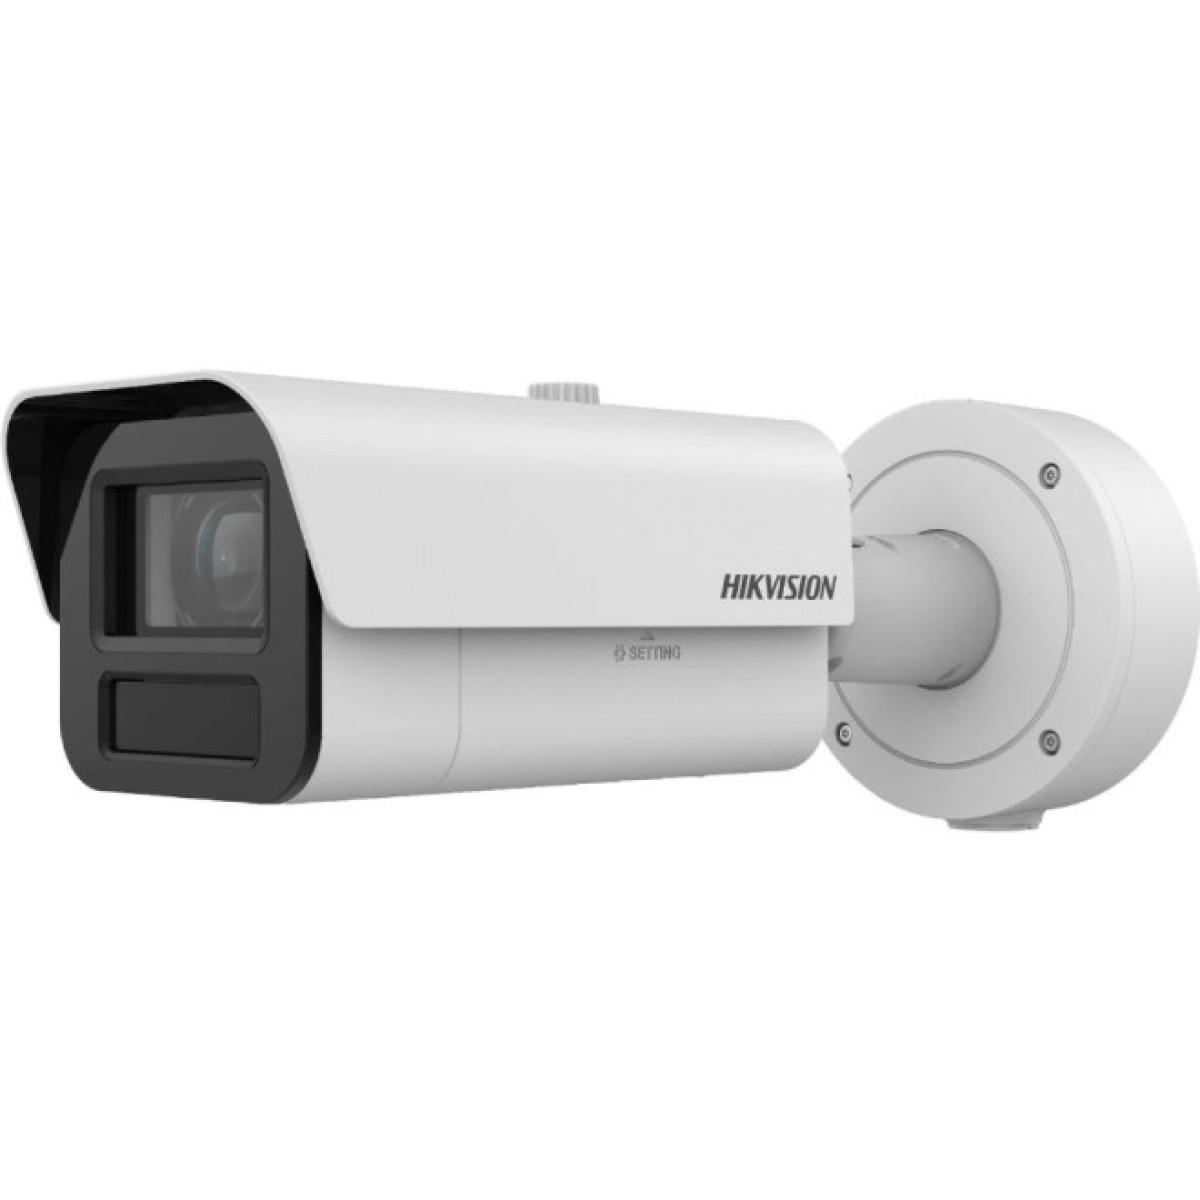 IP-камера Hikvision iDS-2CD7A45G0-IZHS (4.7-118) 256_256.jpg